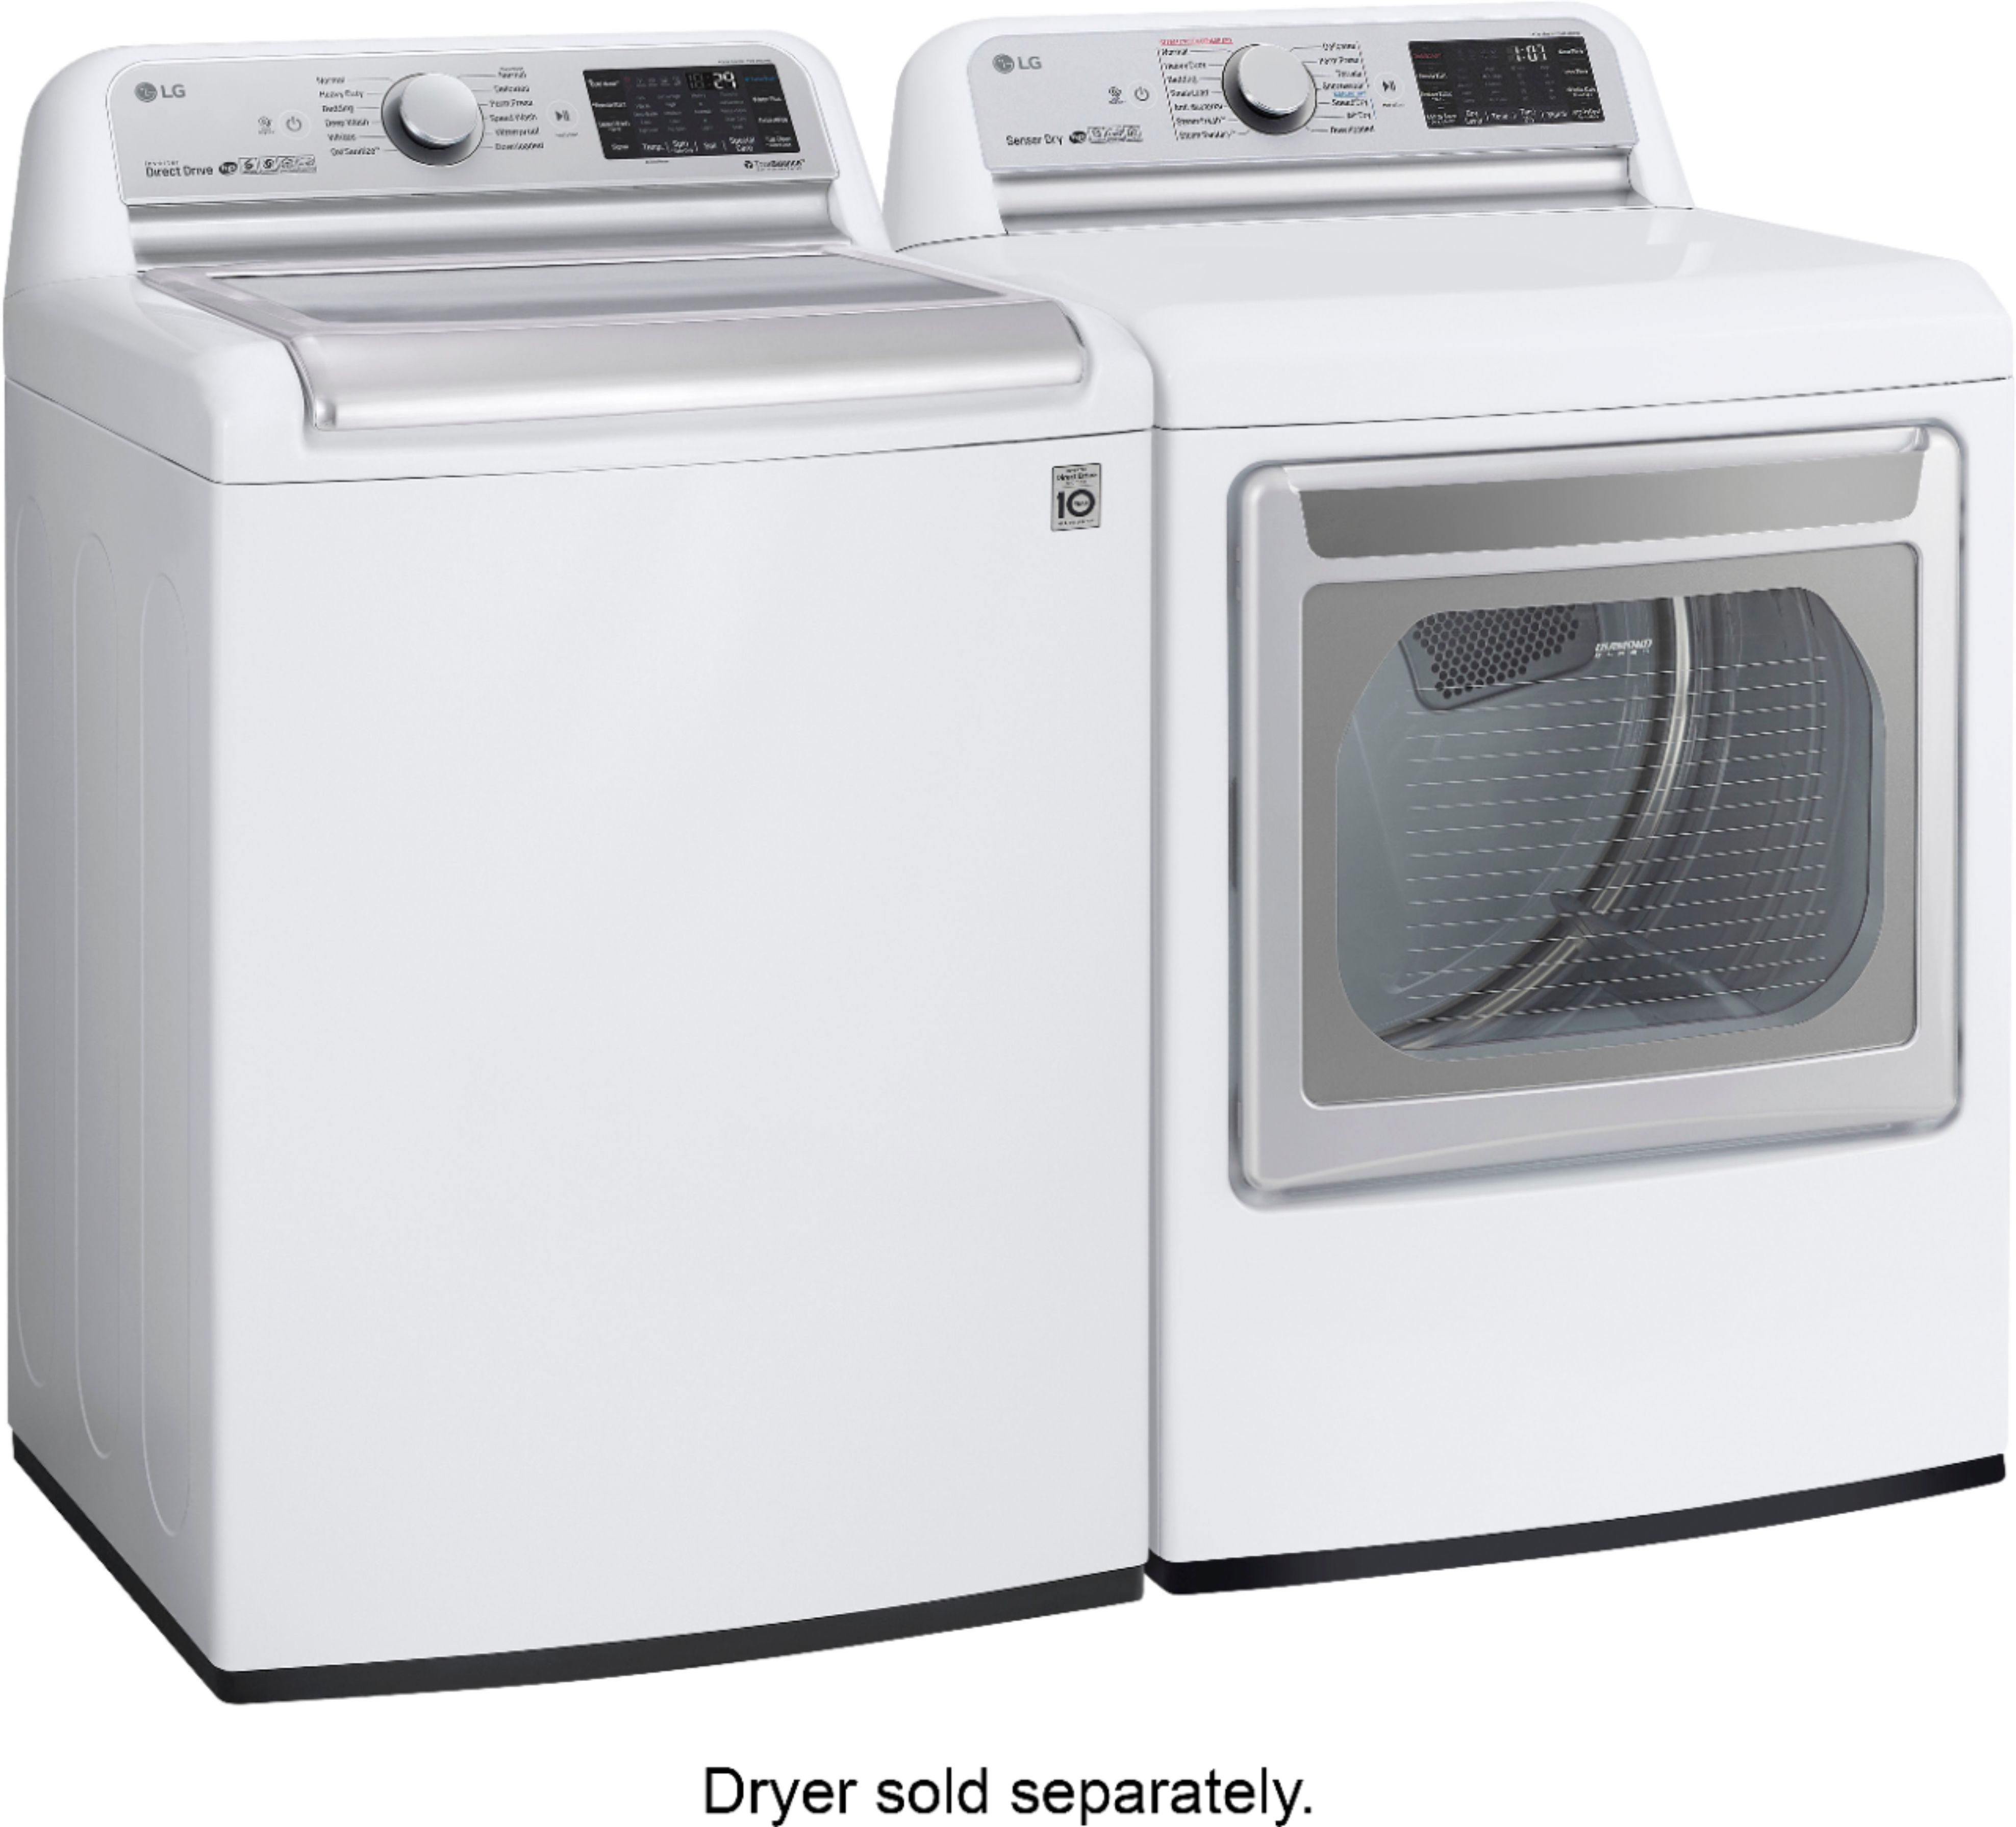 Lg 5 5 Cu Ft 12 Cycle Top Loading Washer With Turbowash3d Technology White Wt7800cw Best Buy